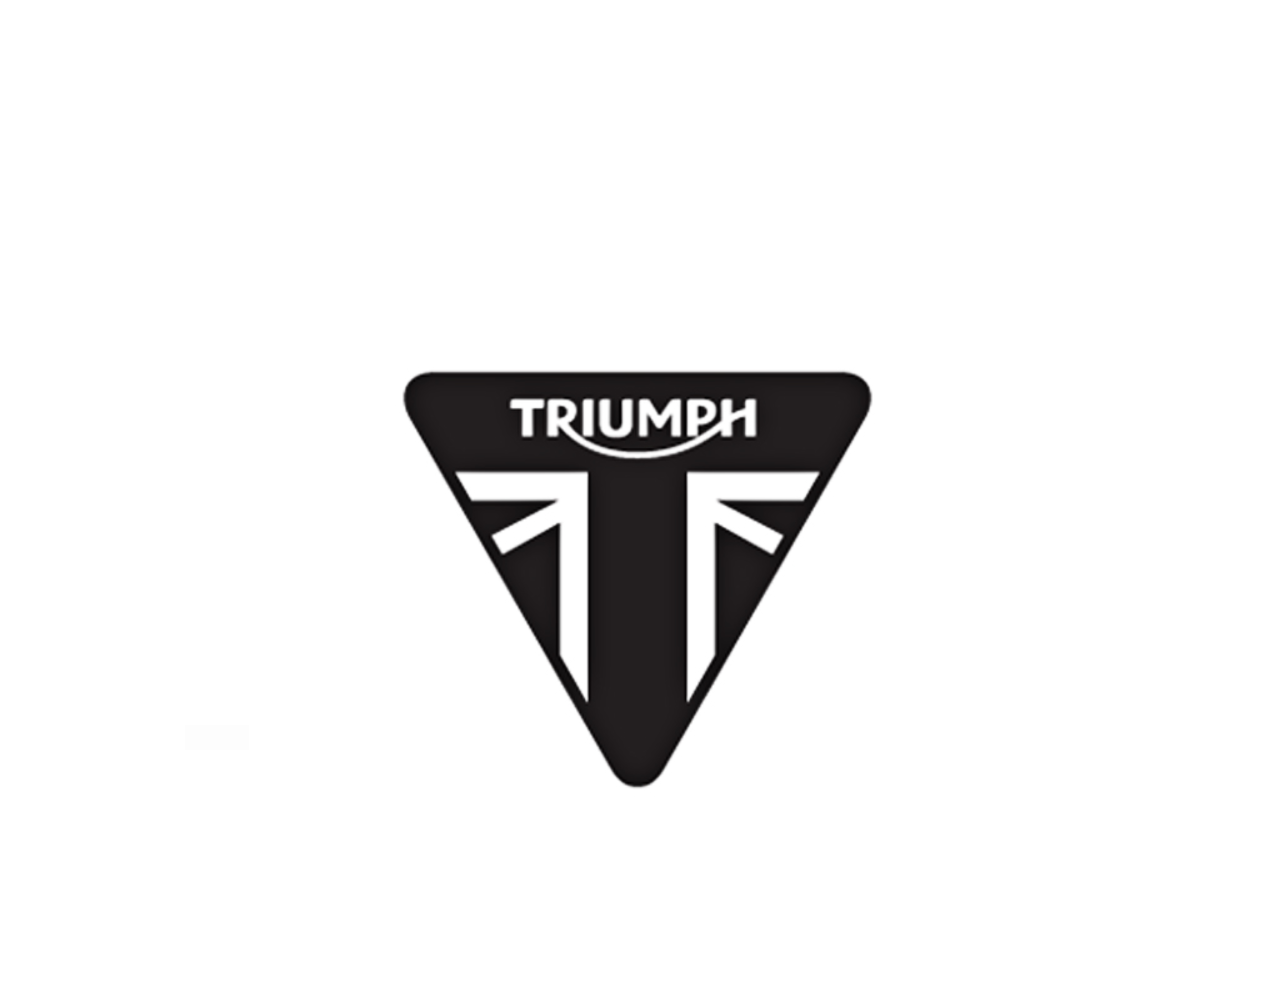 TRIUMPH PRODUCTS